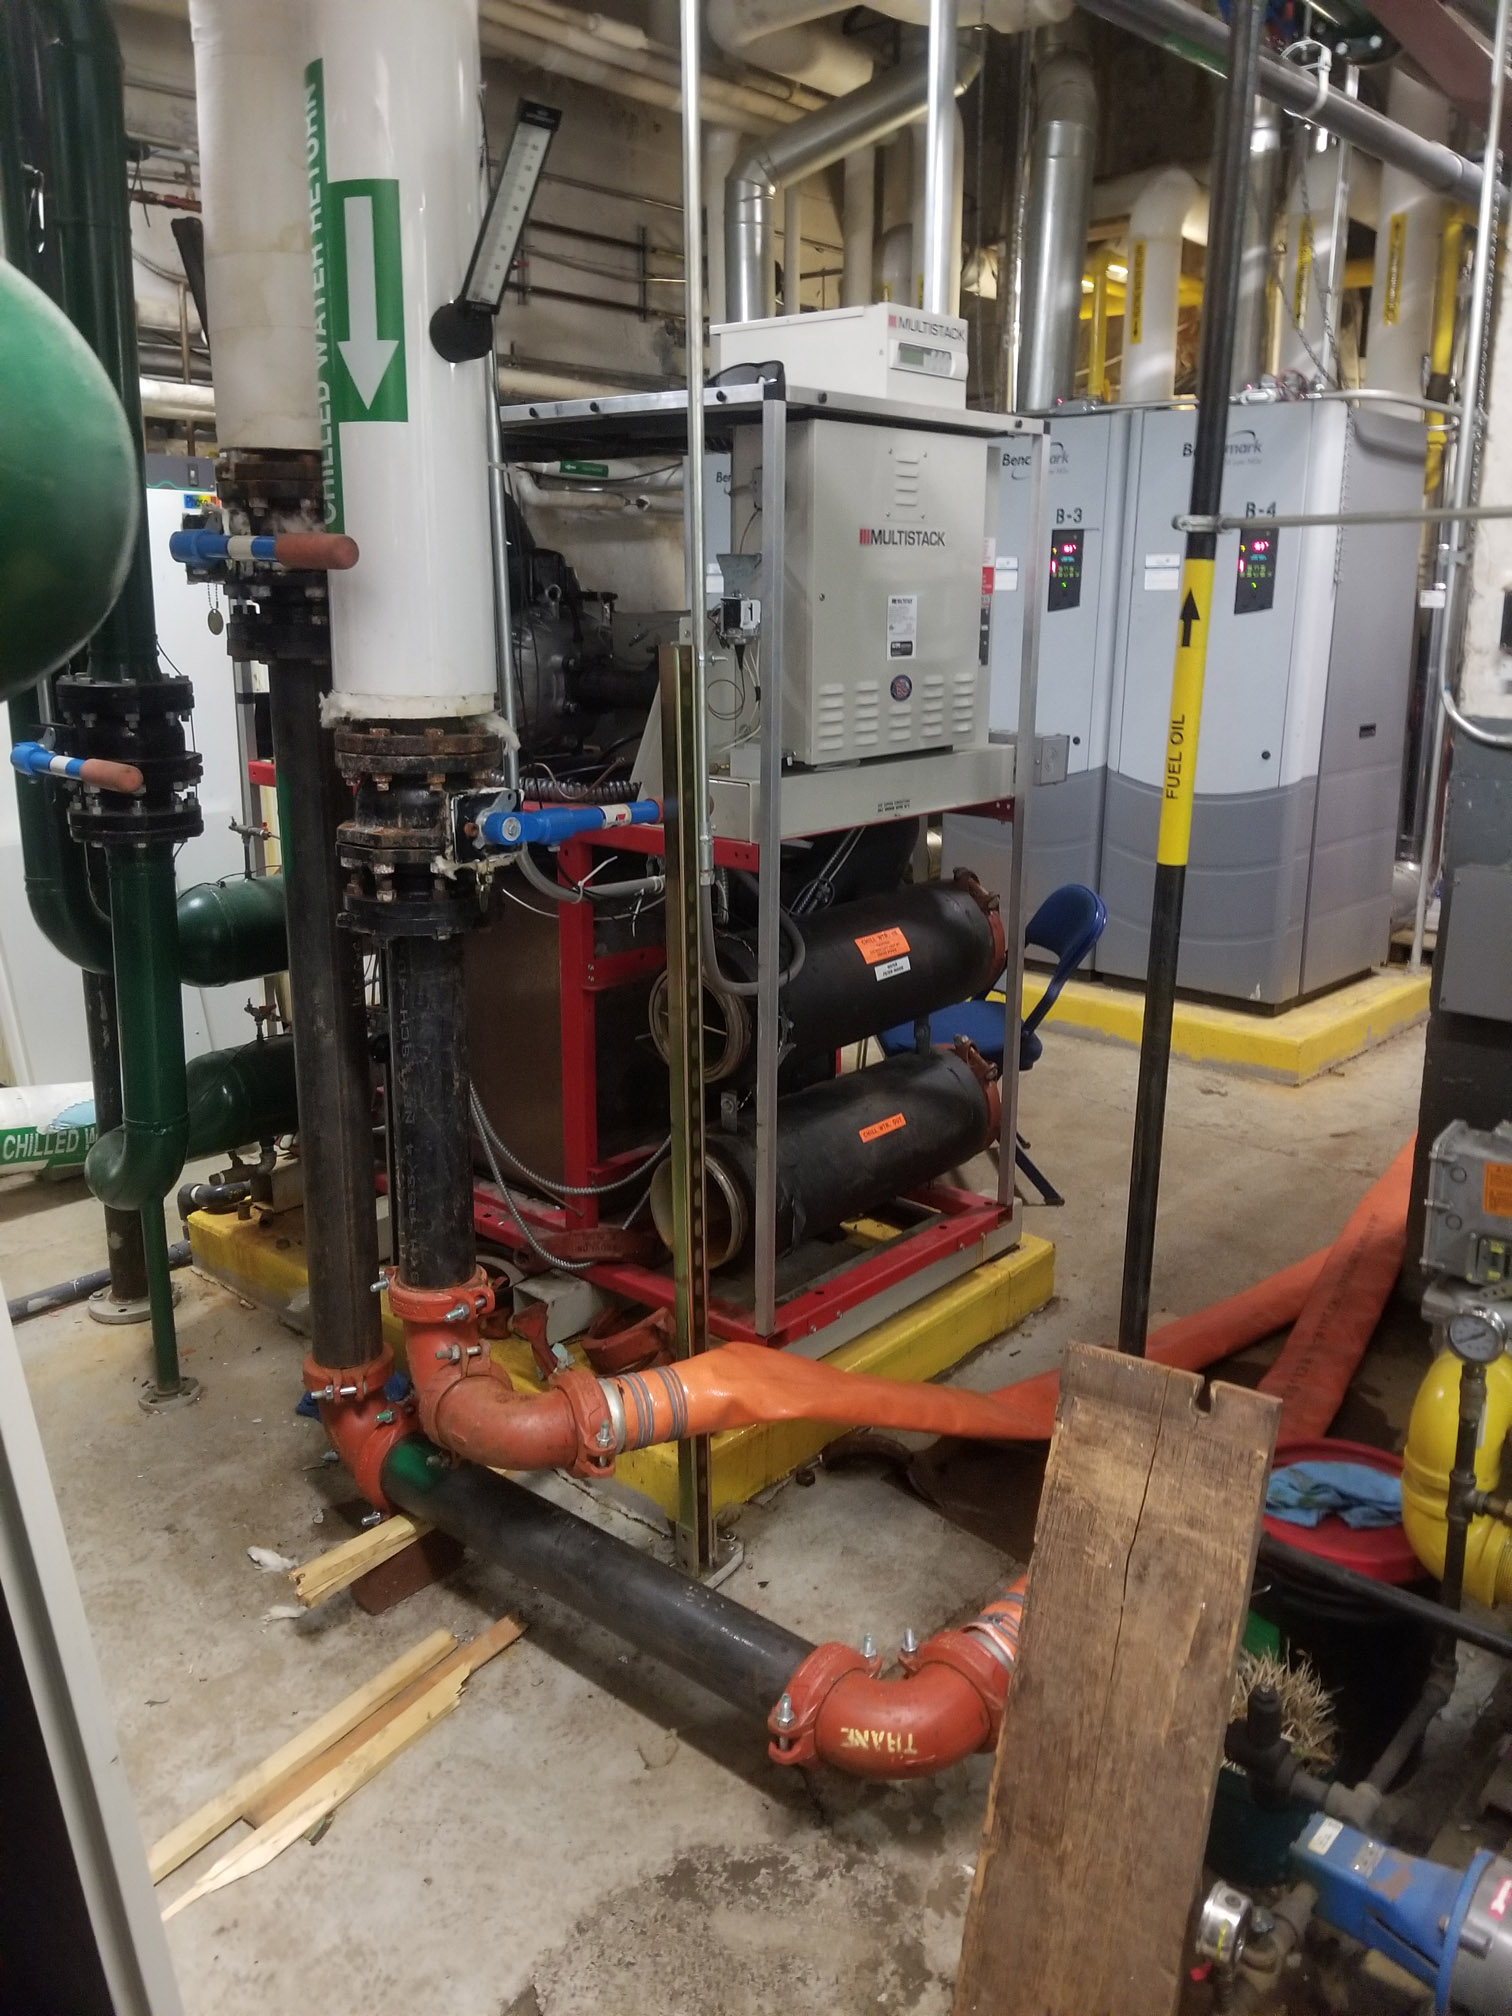 Air Cooled Chiller Rental Pinellas County FL, Chiller AC Rental Pinellas County FL, Temporary Chiller Pinellas County FL, Rental Chiller Installation Pinellas County FL